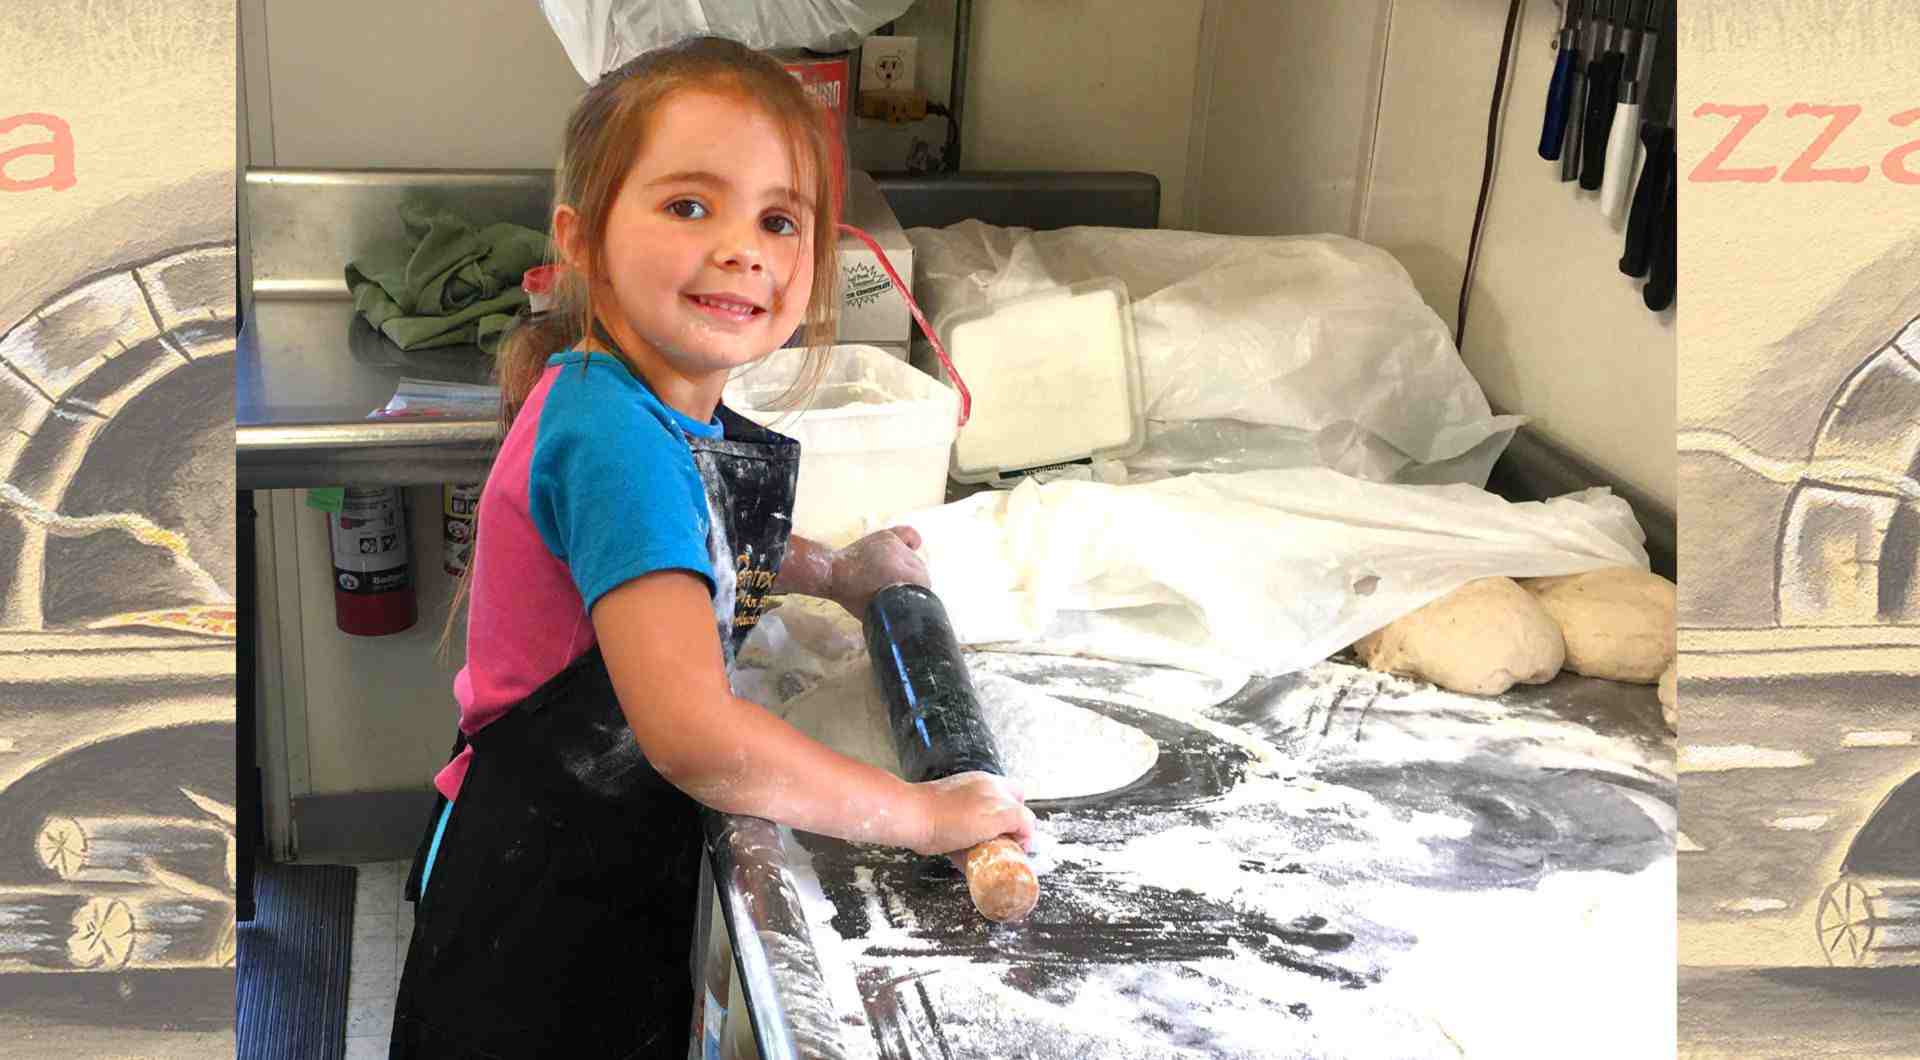 an image of the grand daughter of the owner Val, she is rolling out some pizza dough, standing on a stool, she looks to be about 5 years old, it's a very cute picture